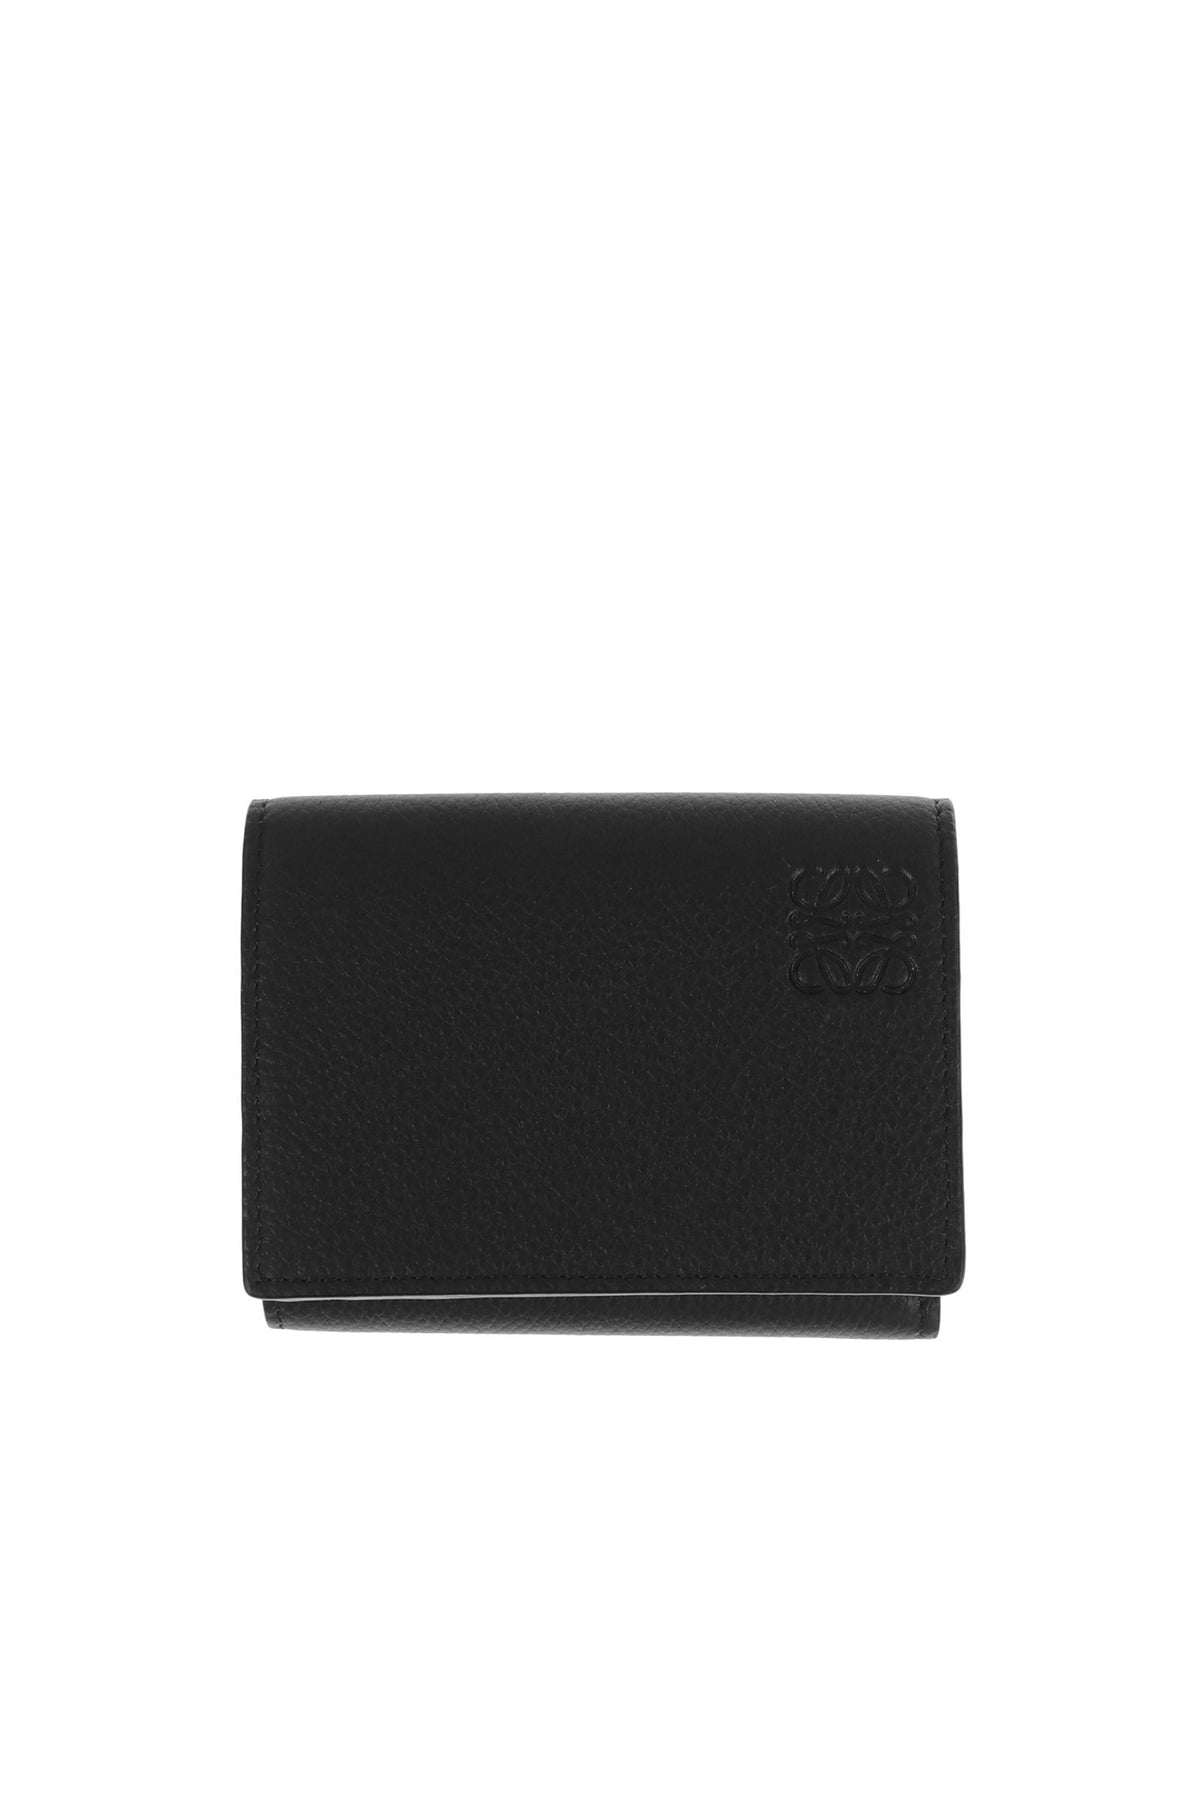 TIGHTBOOTH タイトブース FW23 LEATHER BIFOLD WALLET / BLK -NUBIAN